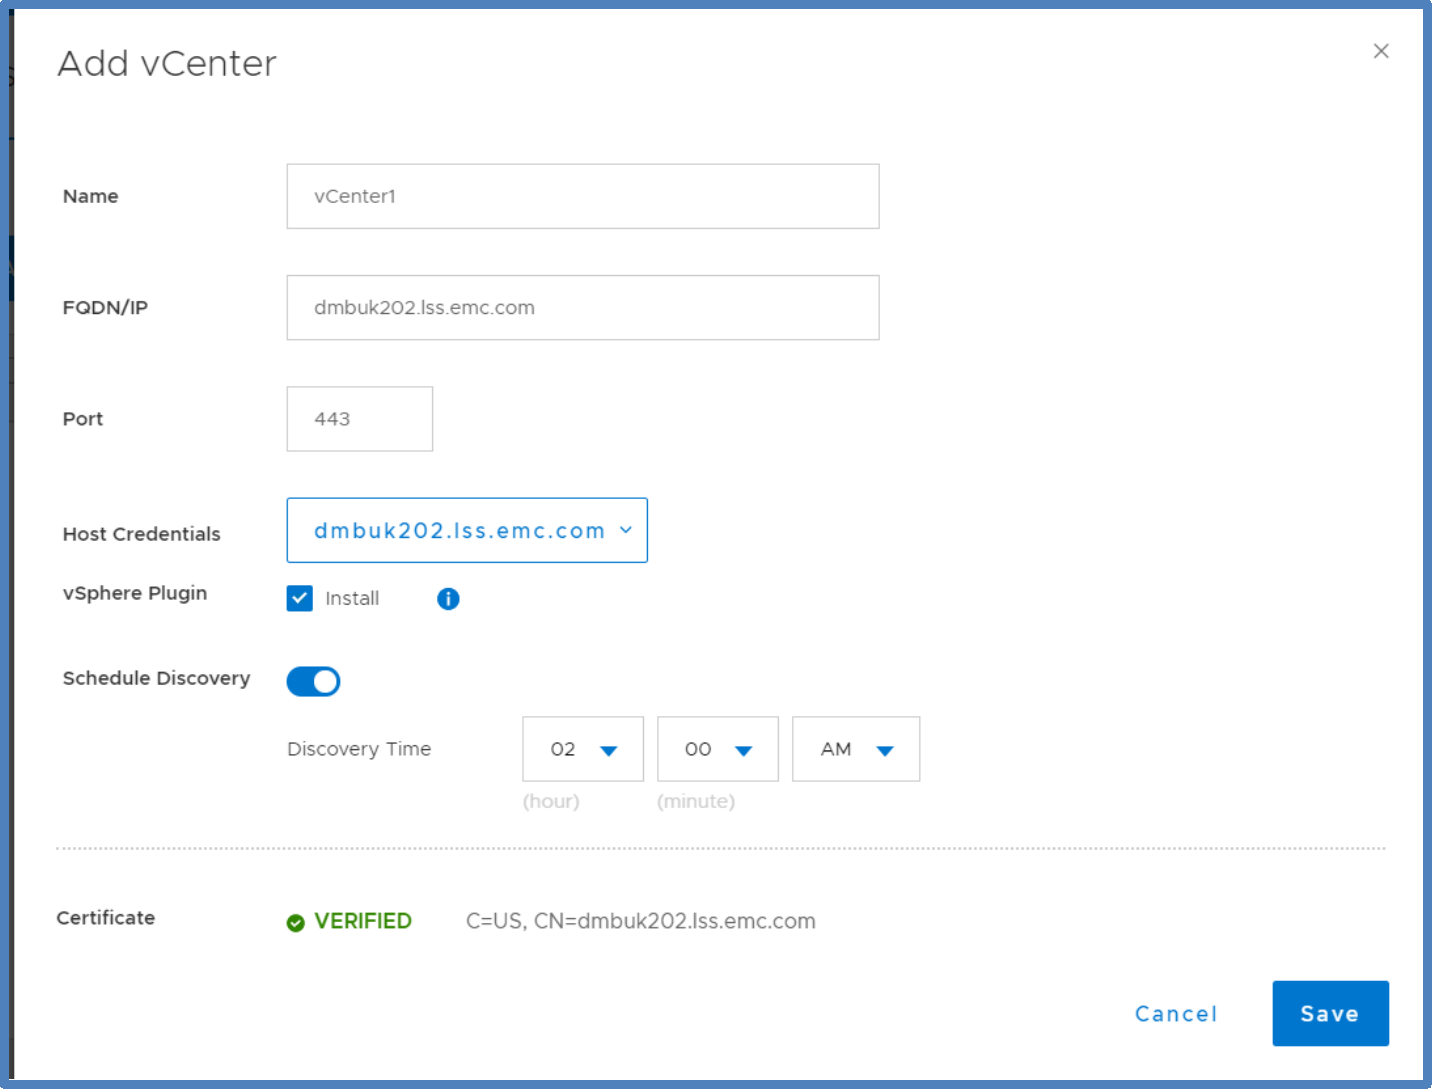 This figure shows the vCenter - Addition page.